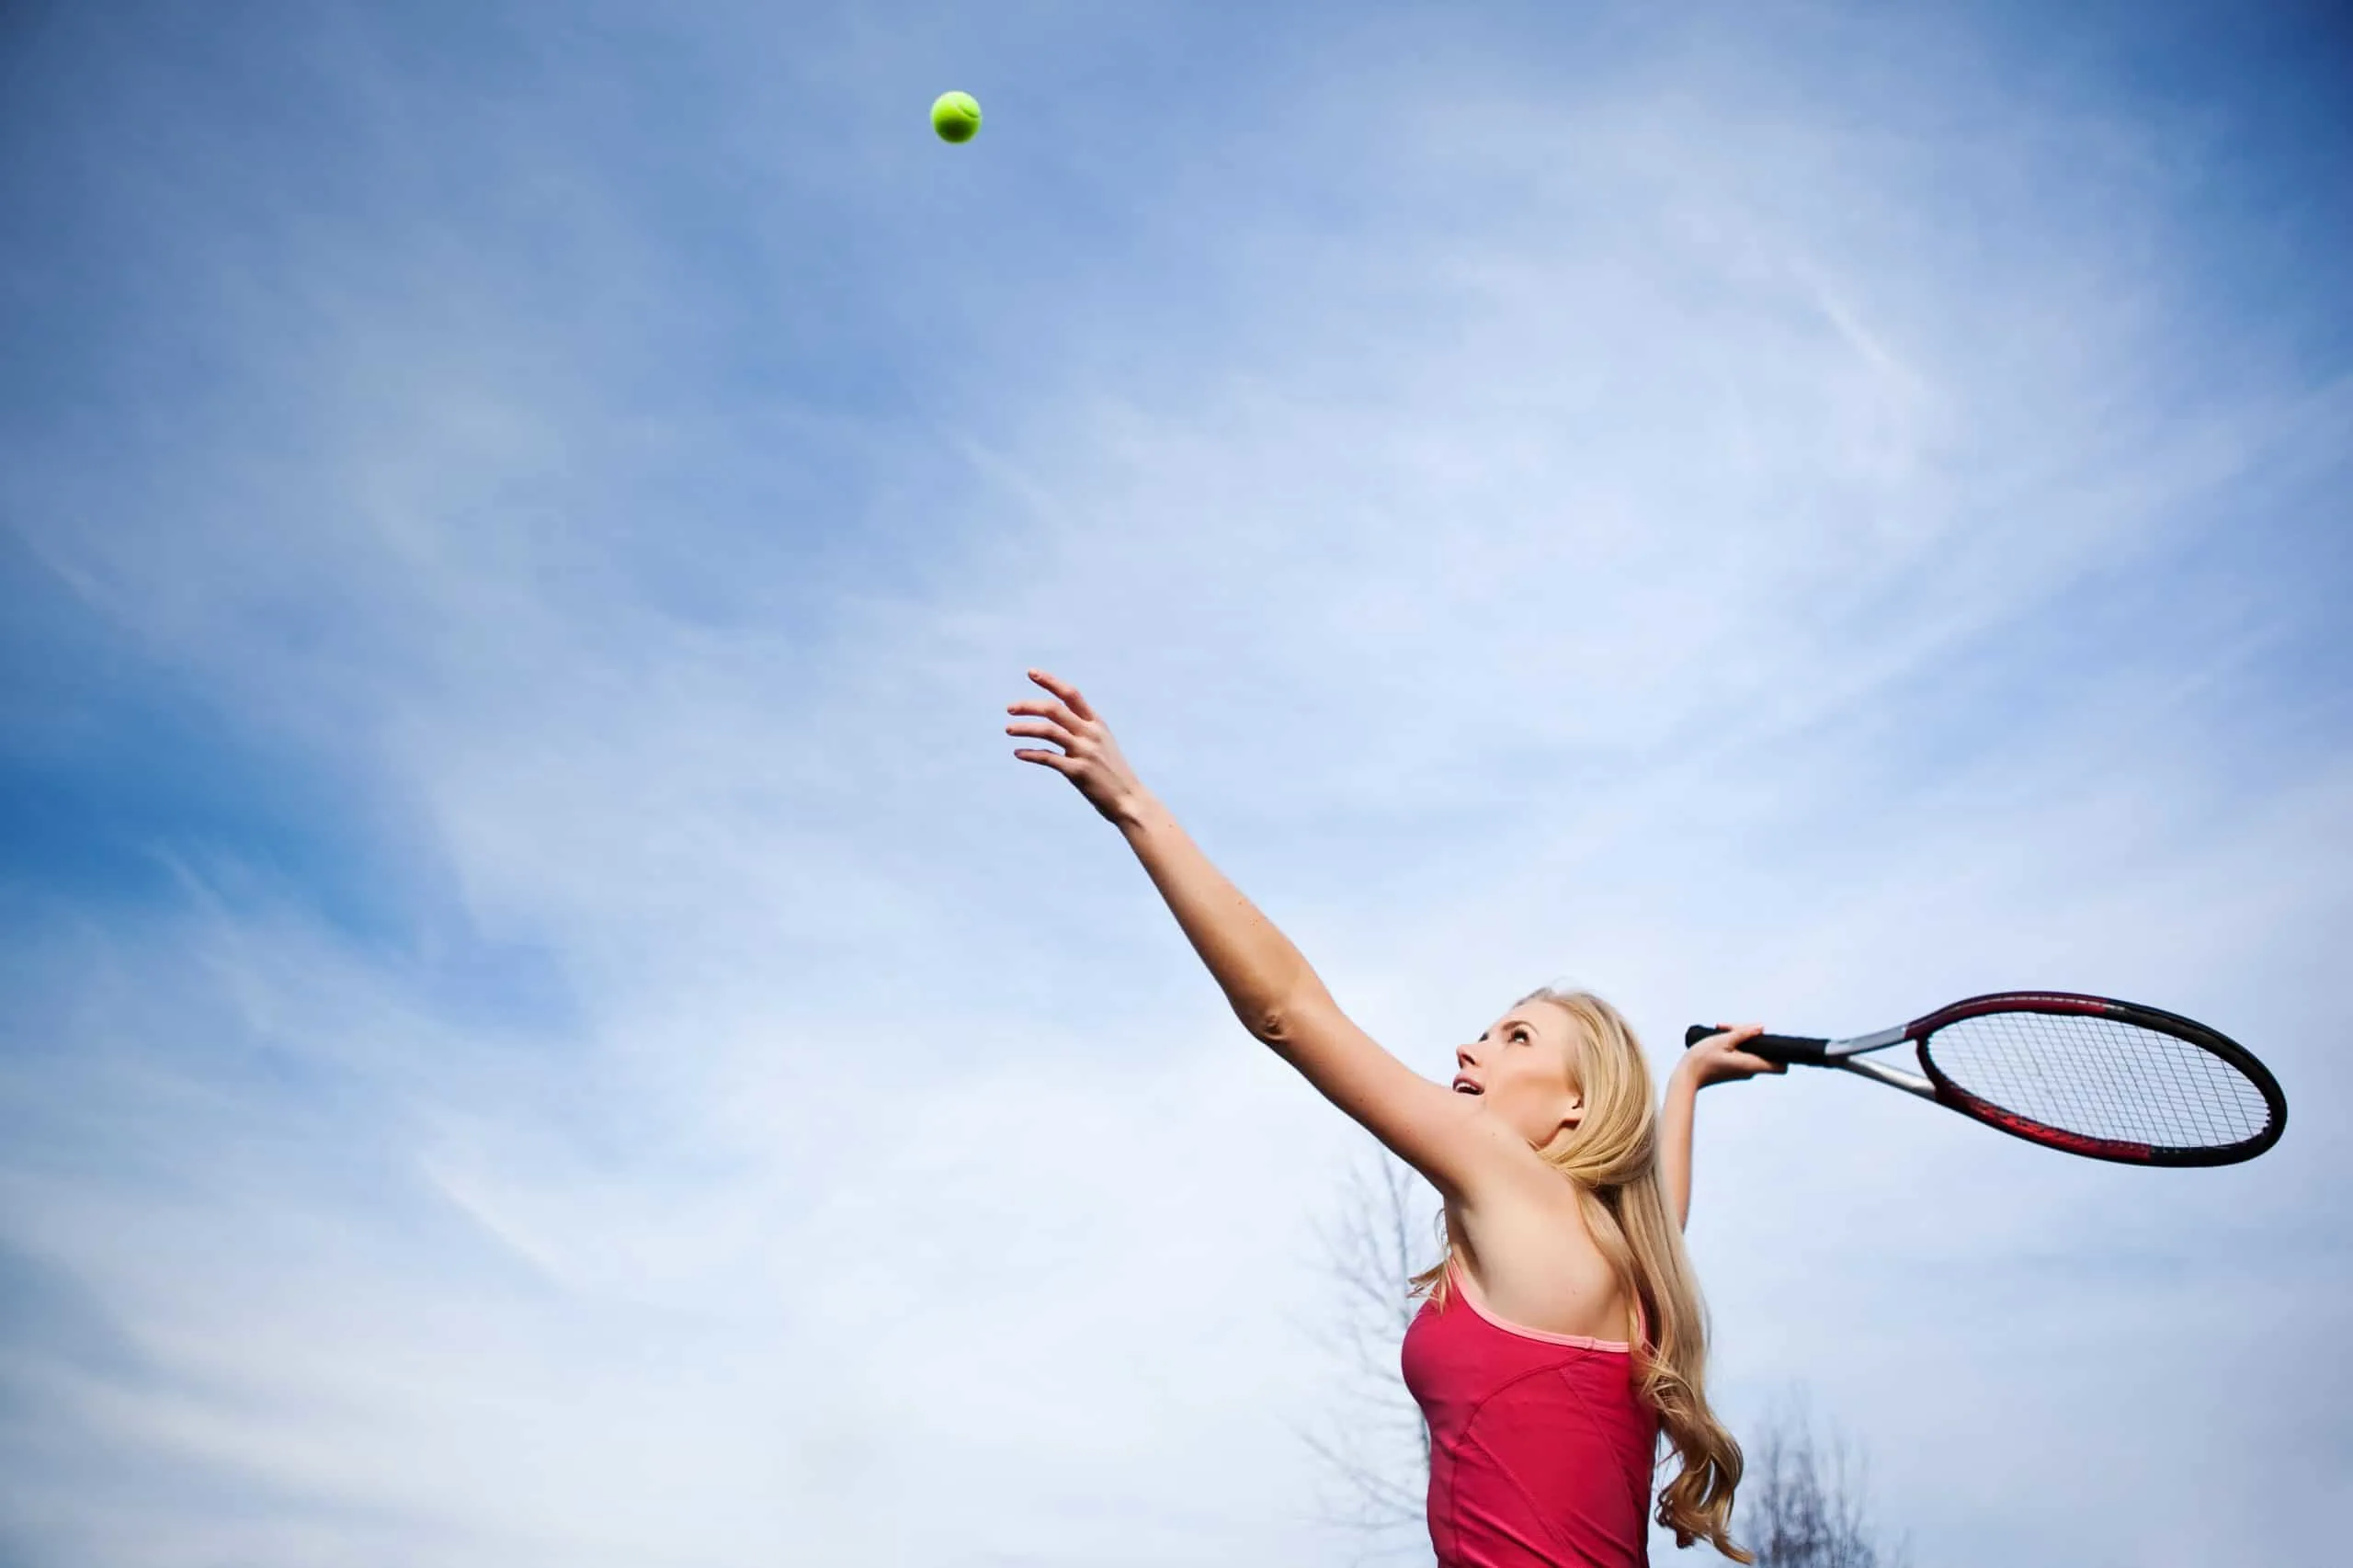 Master your second serve in tennis